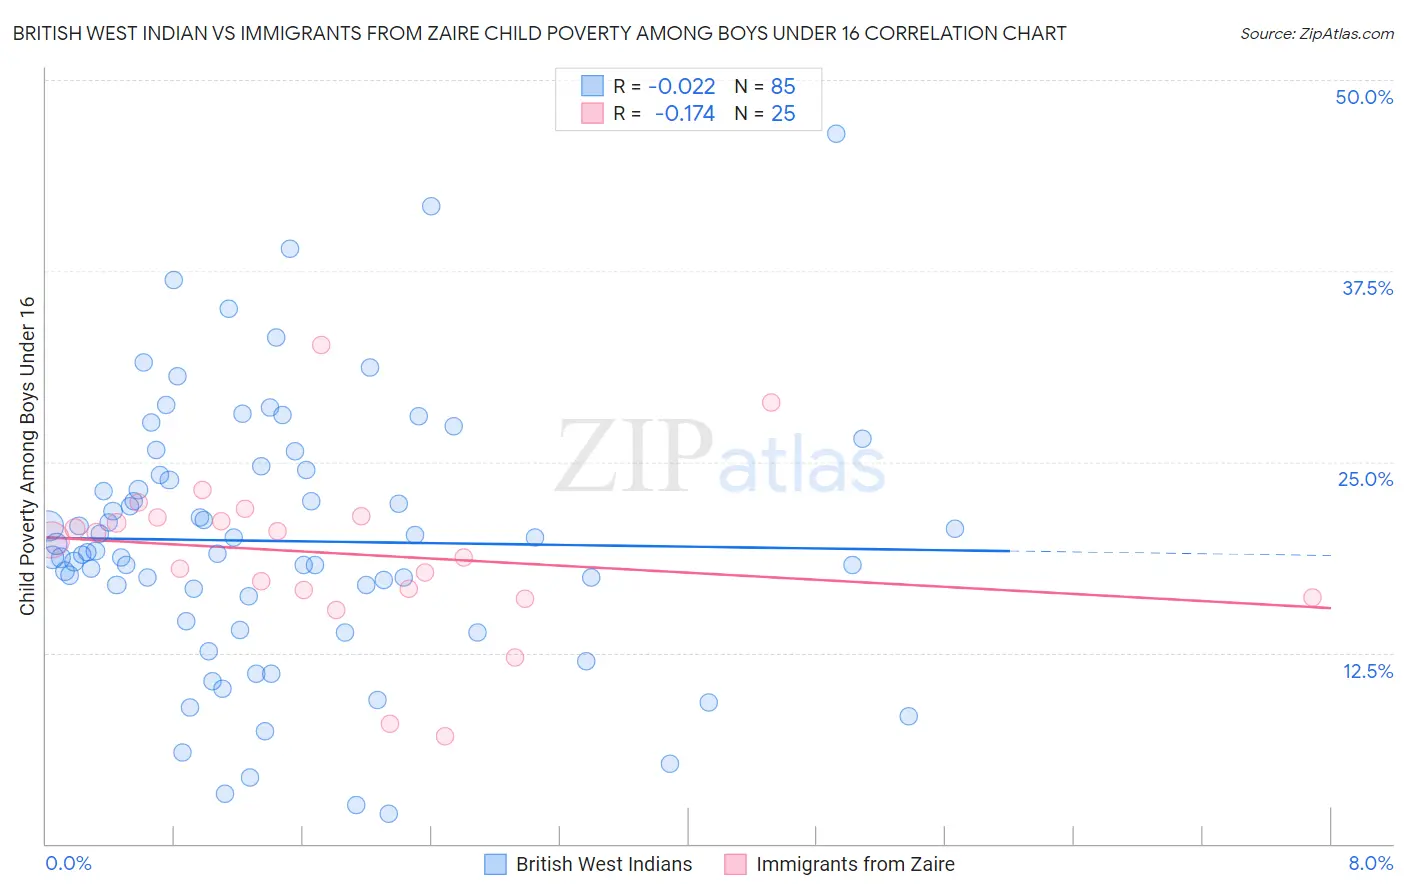 British West Indian vs Immigrants from Zaire Child Poverty Among Boys Under 16